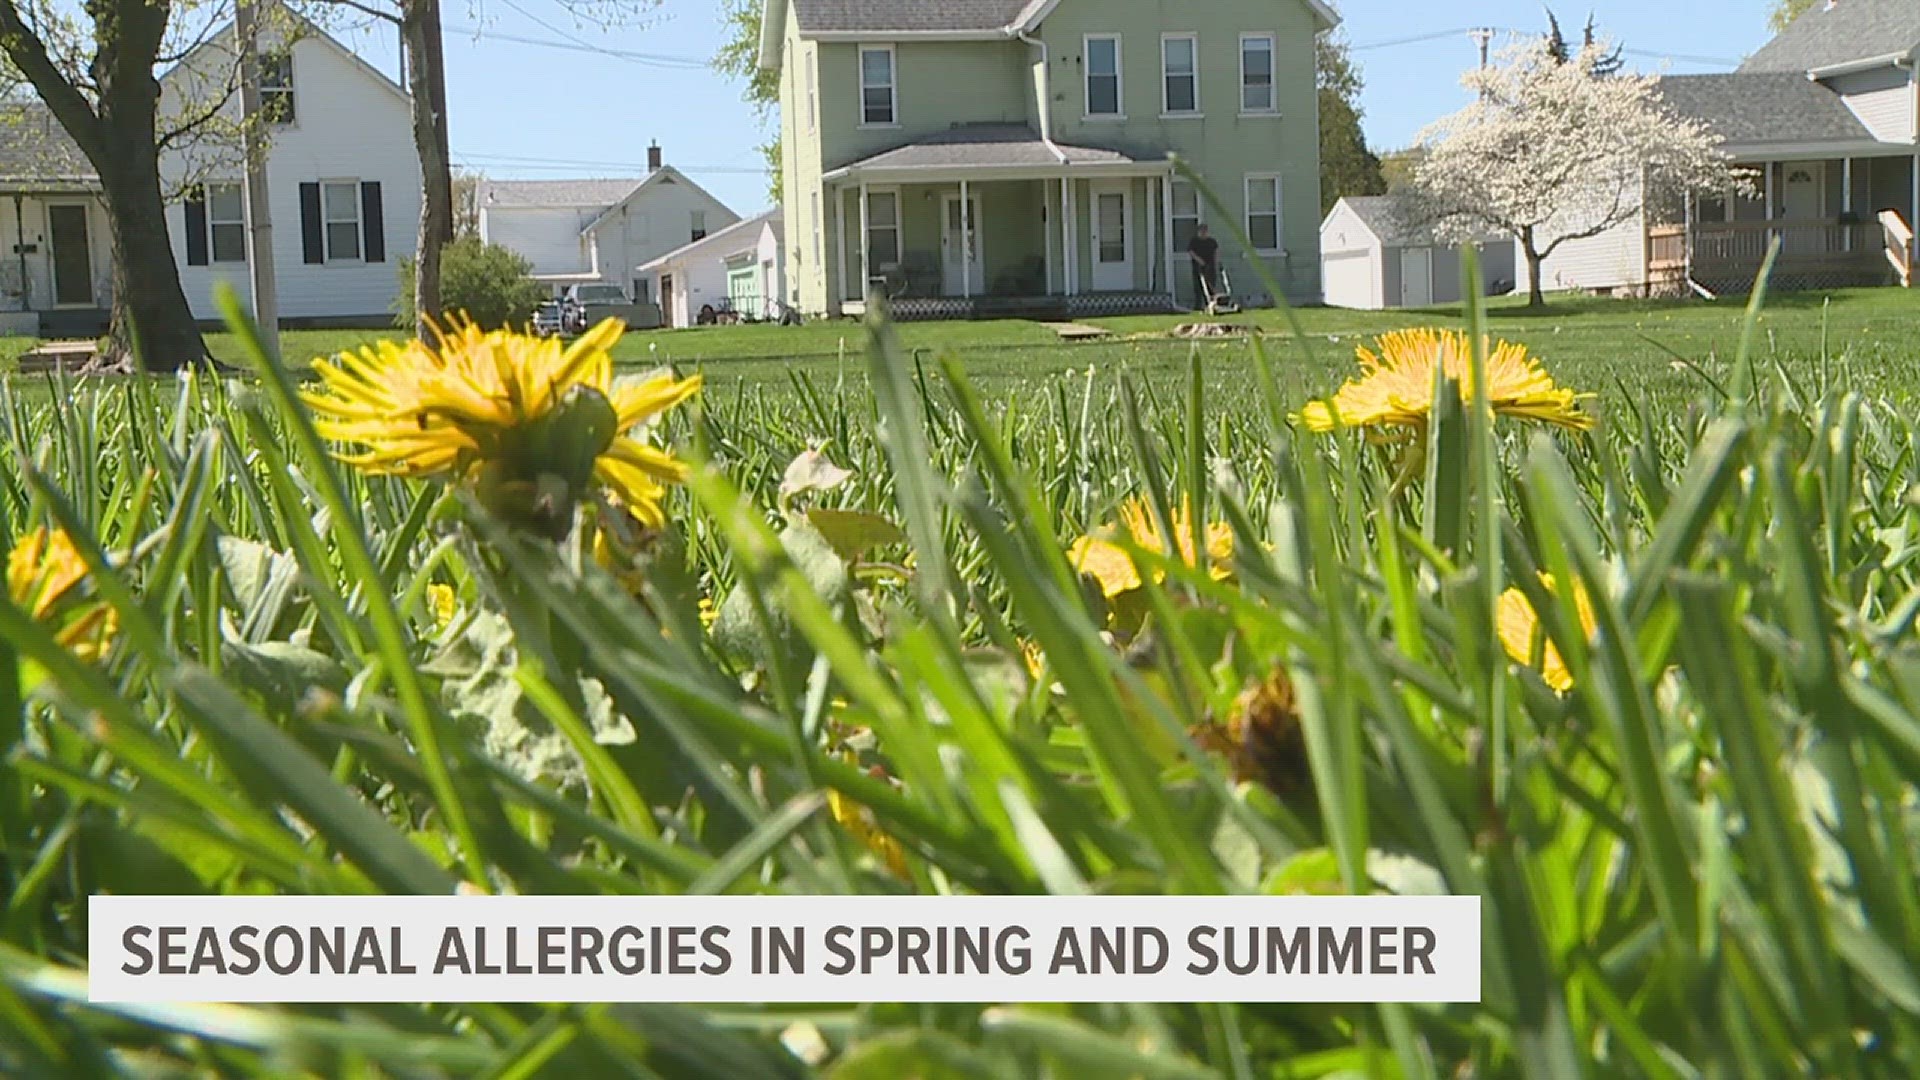 Doctors say tree and grass pollen are the biggest cause of seasonal allergies in the spring and summer.